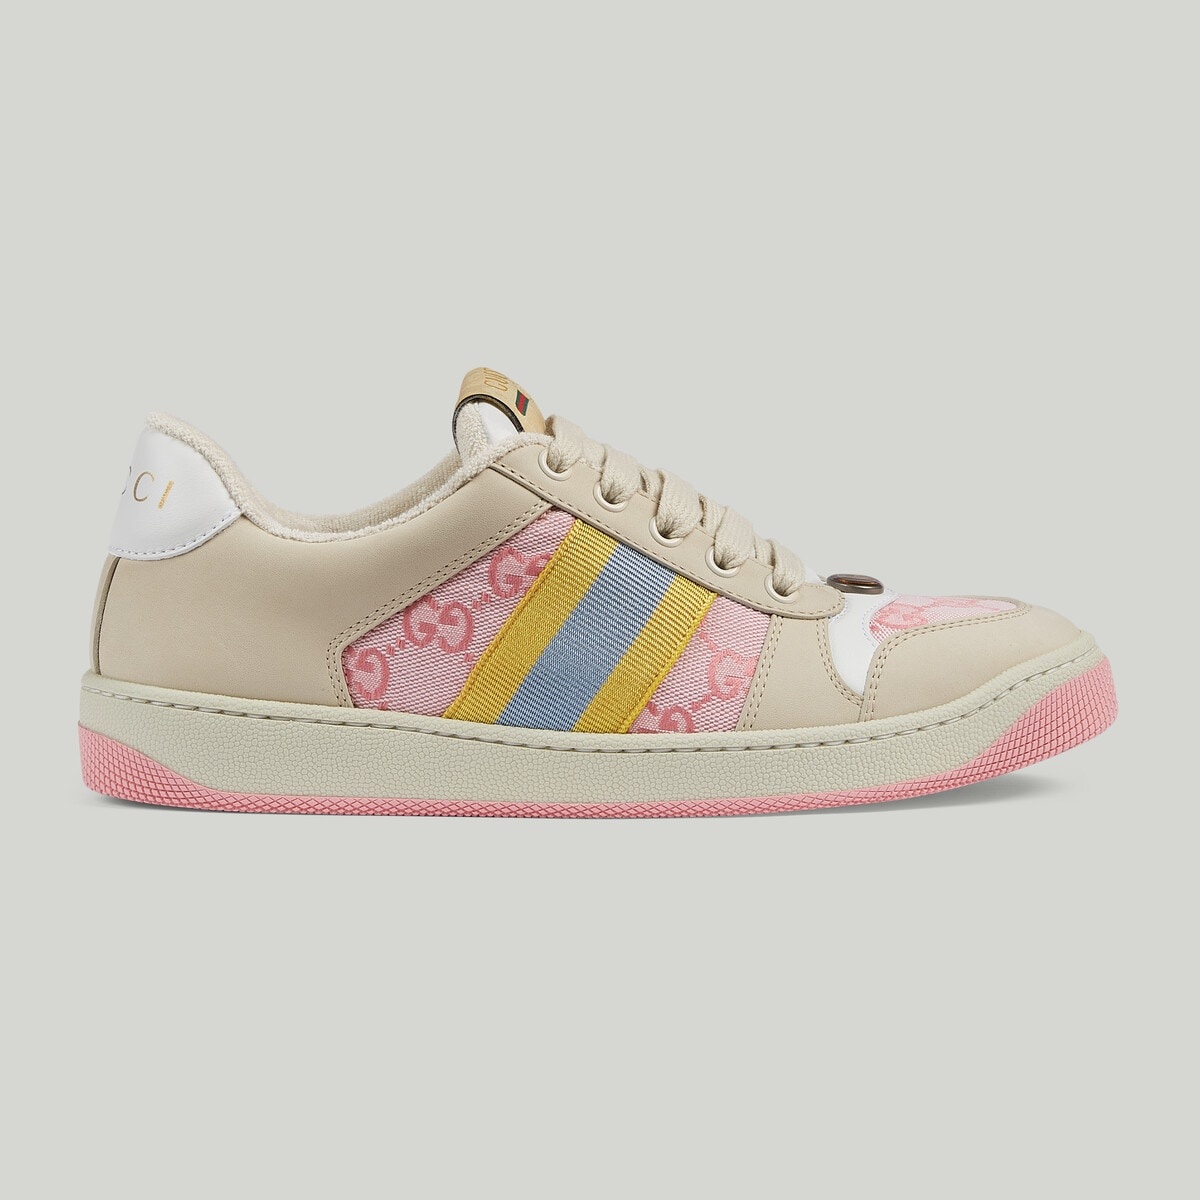 Gucci panelled low-top sneakers - Grey